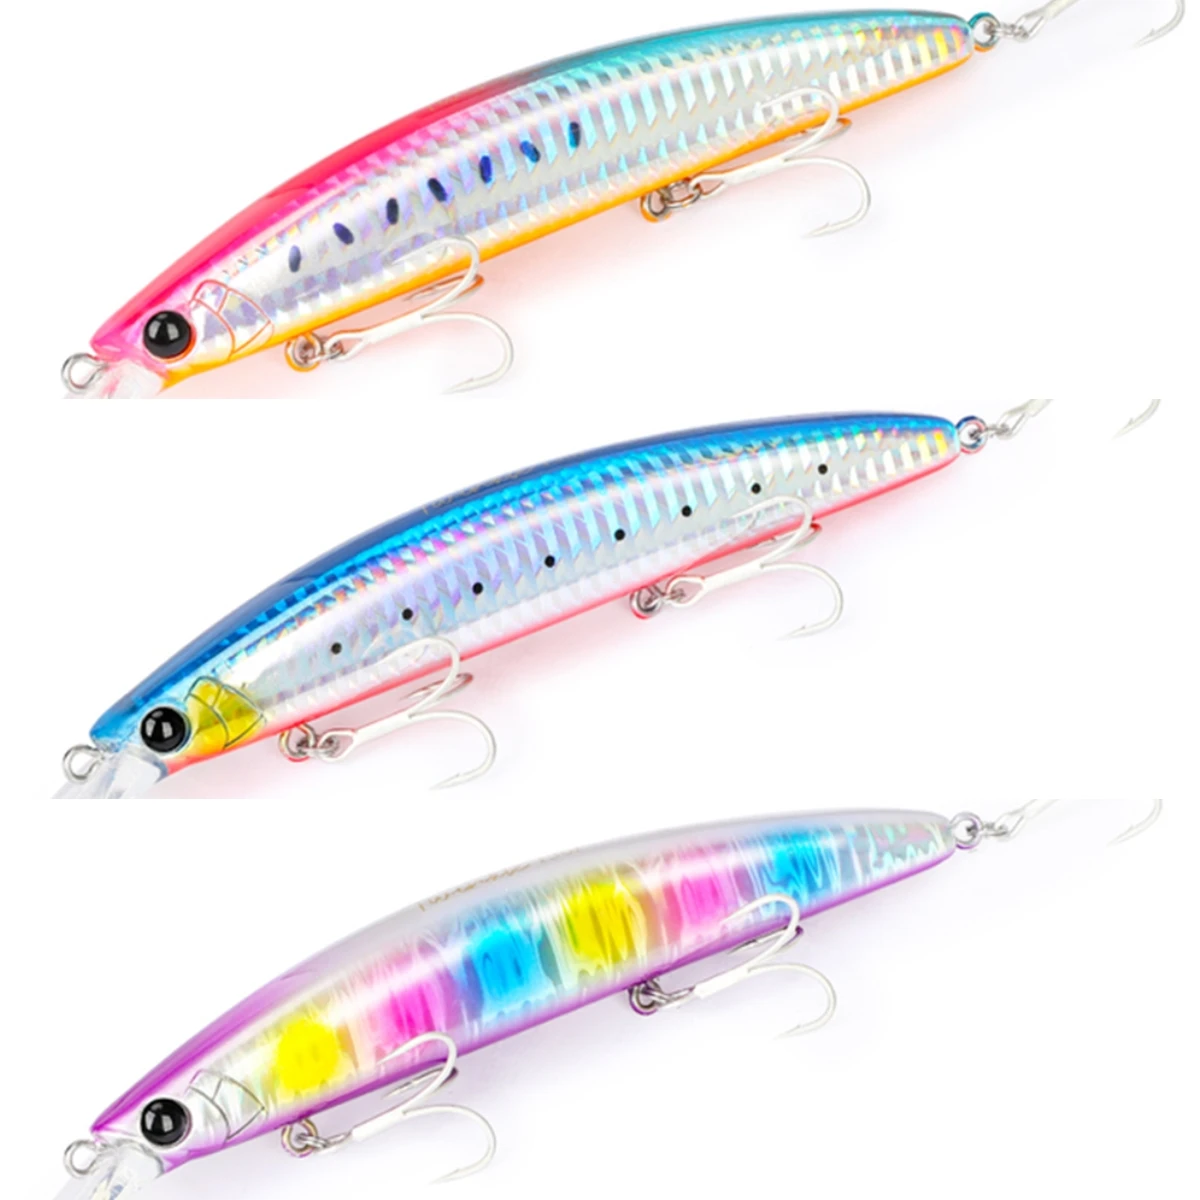 

Top Right 23g 130mm M107B New Color Hard Baits Salt Water Fishing Lure Sasuke Slow Floating Minnow For Pesca, As the picture shows